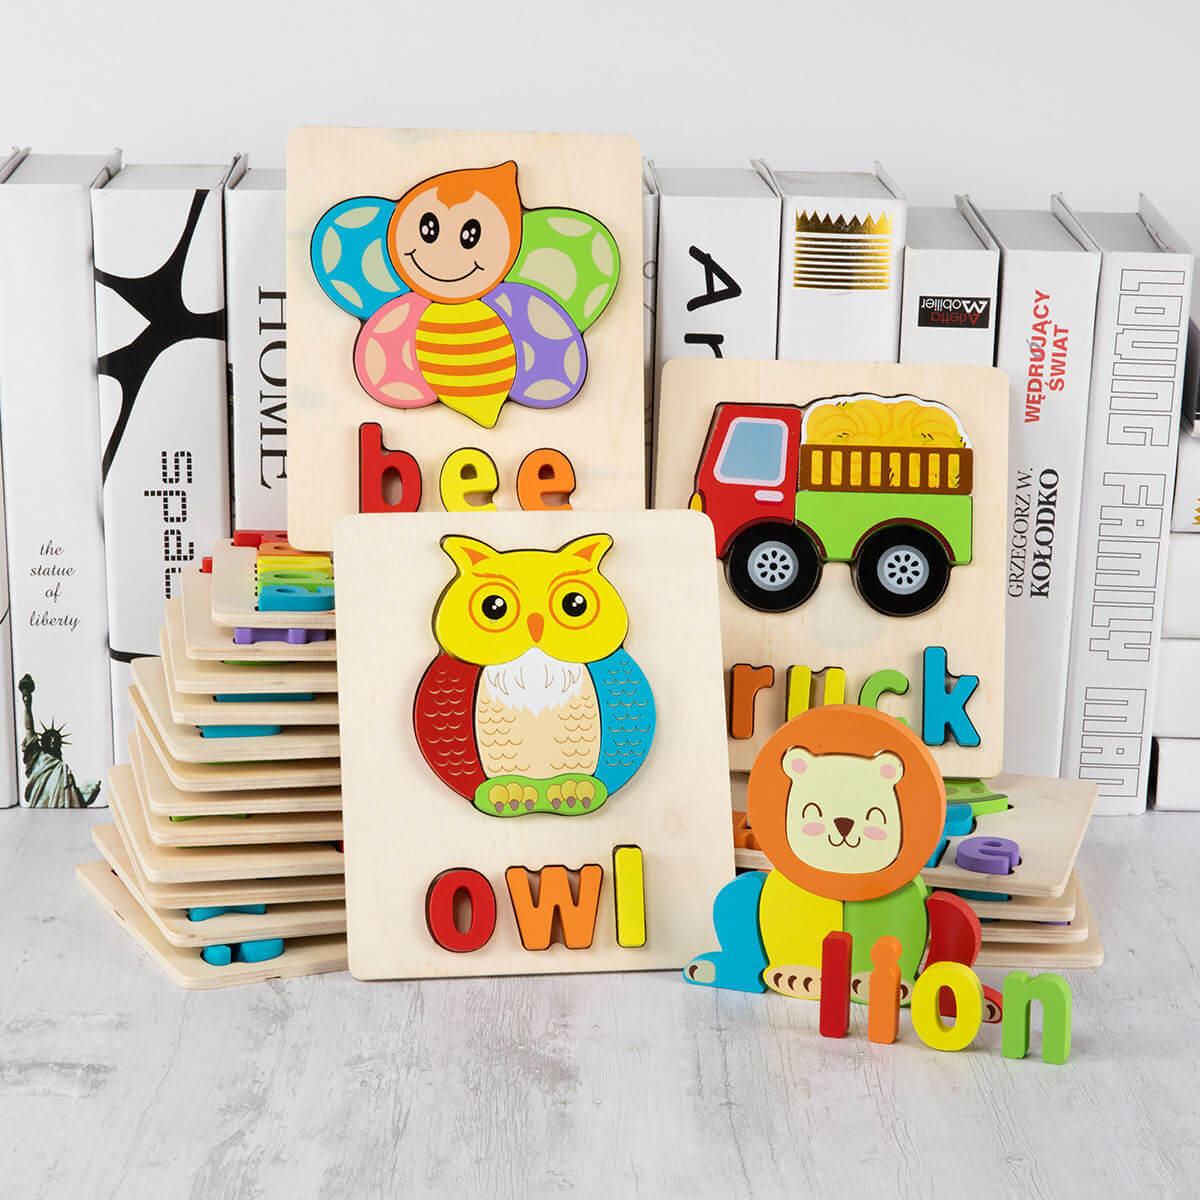 Personalized Puzzles For Kids